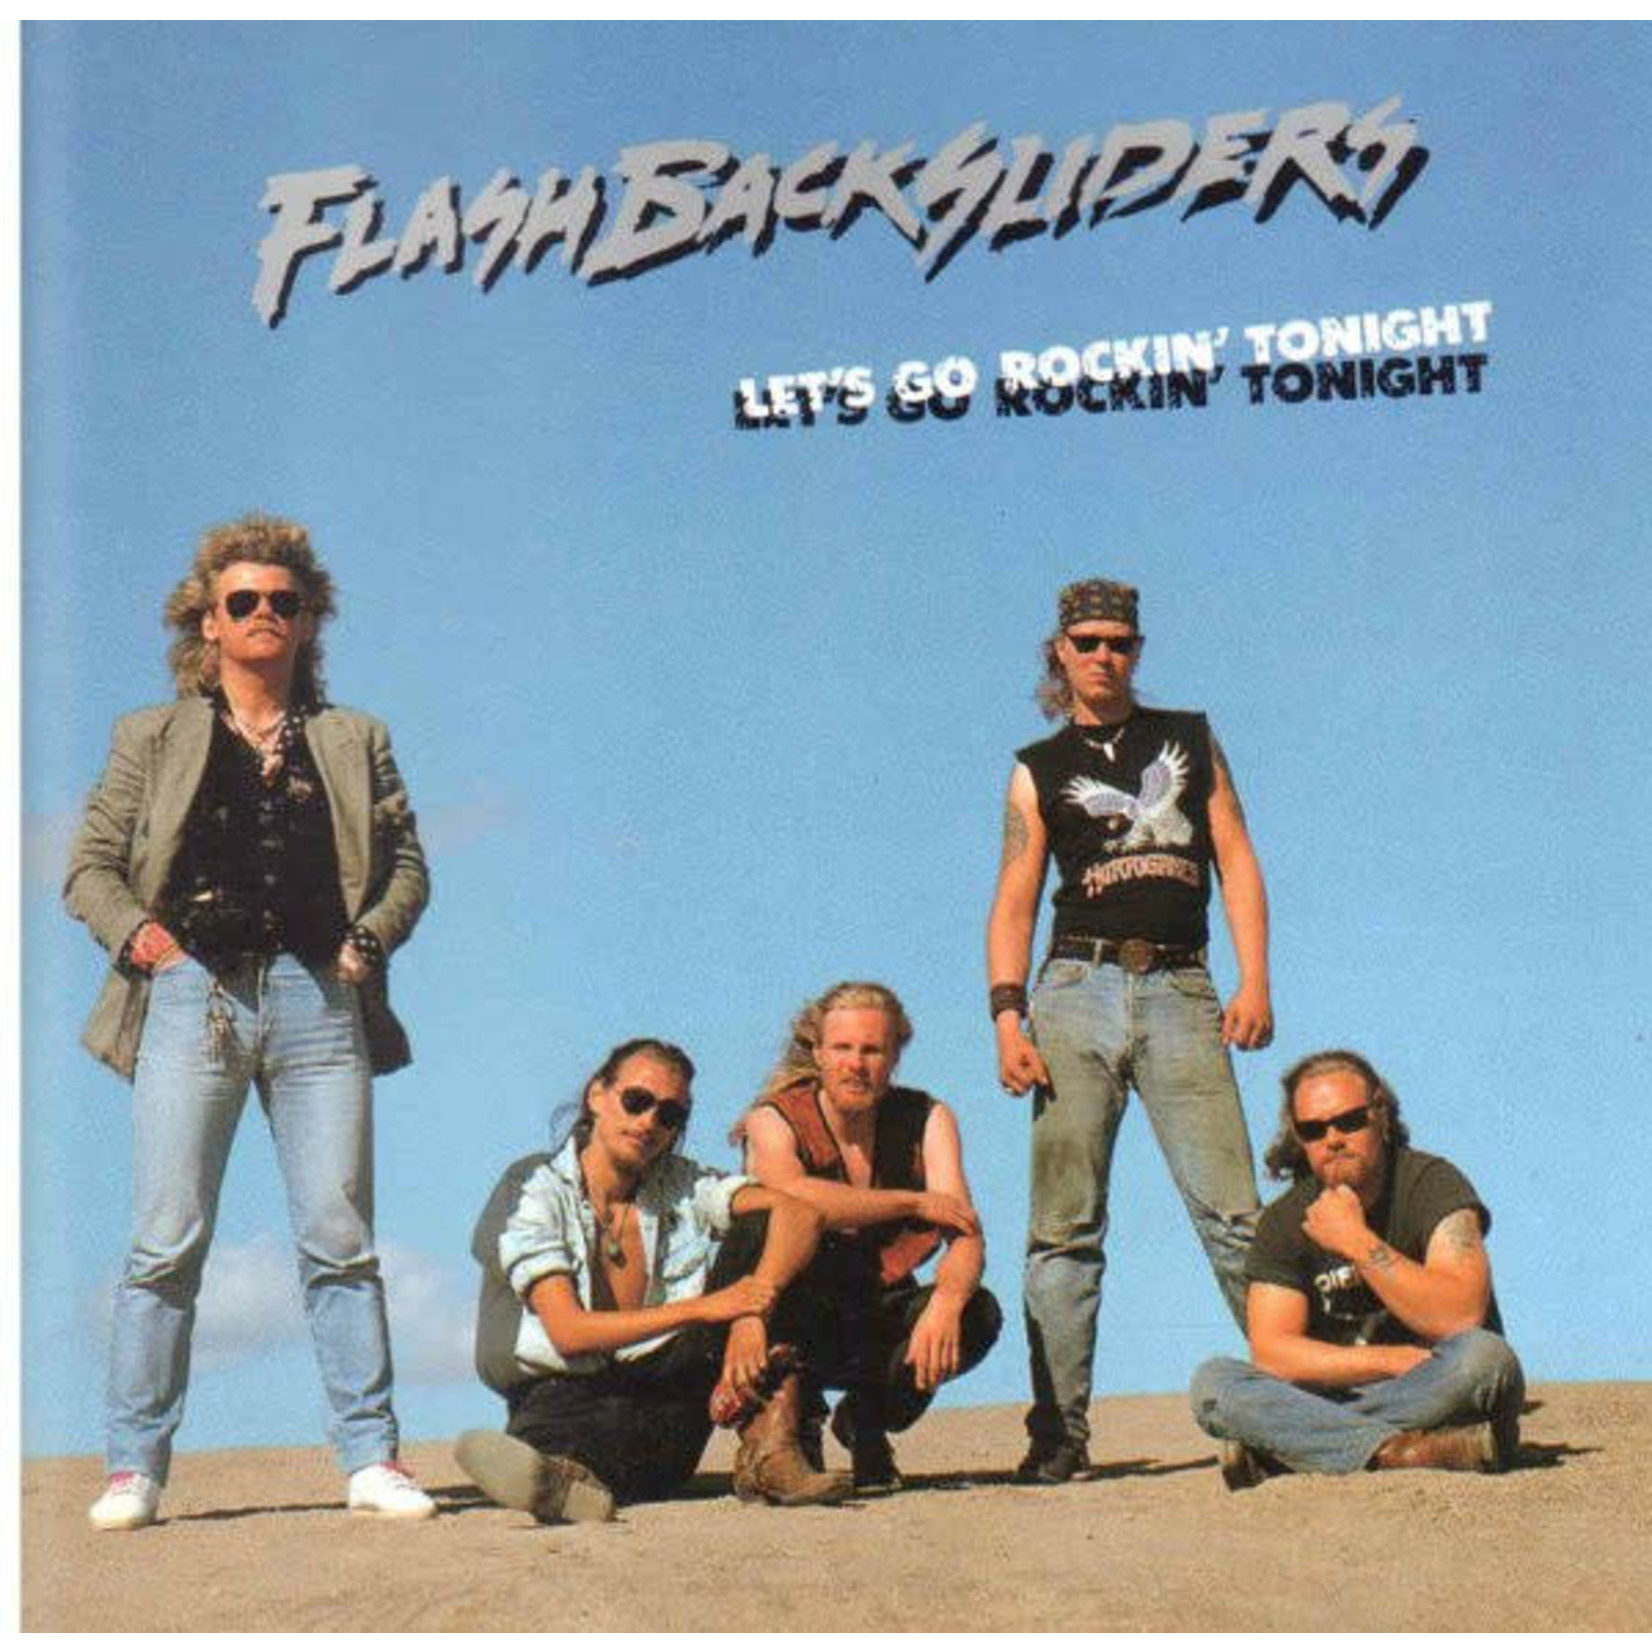 [Kollectibles] Flashbacksliders - Let's Go Rockin' Tonight (1990 Finland, Cover VG/Disc VG)